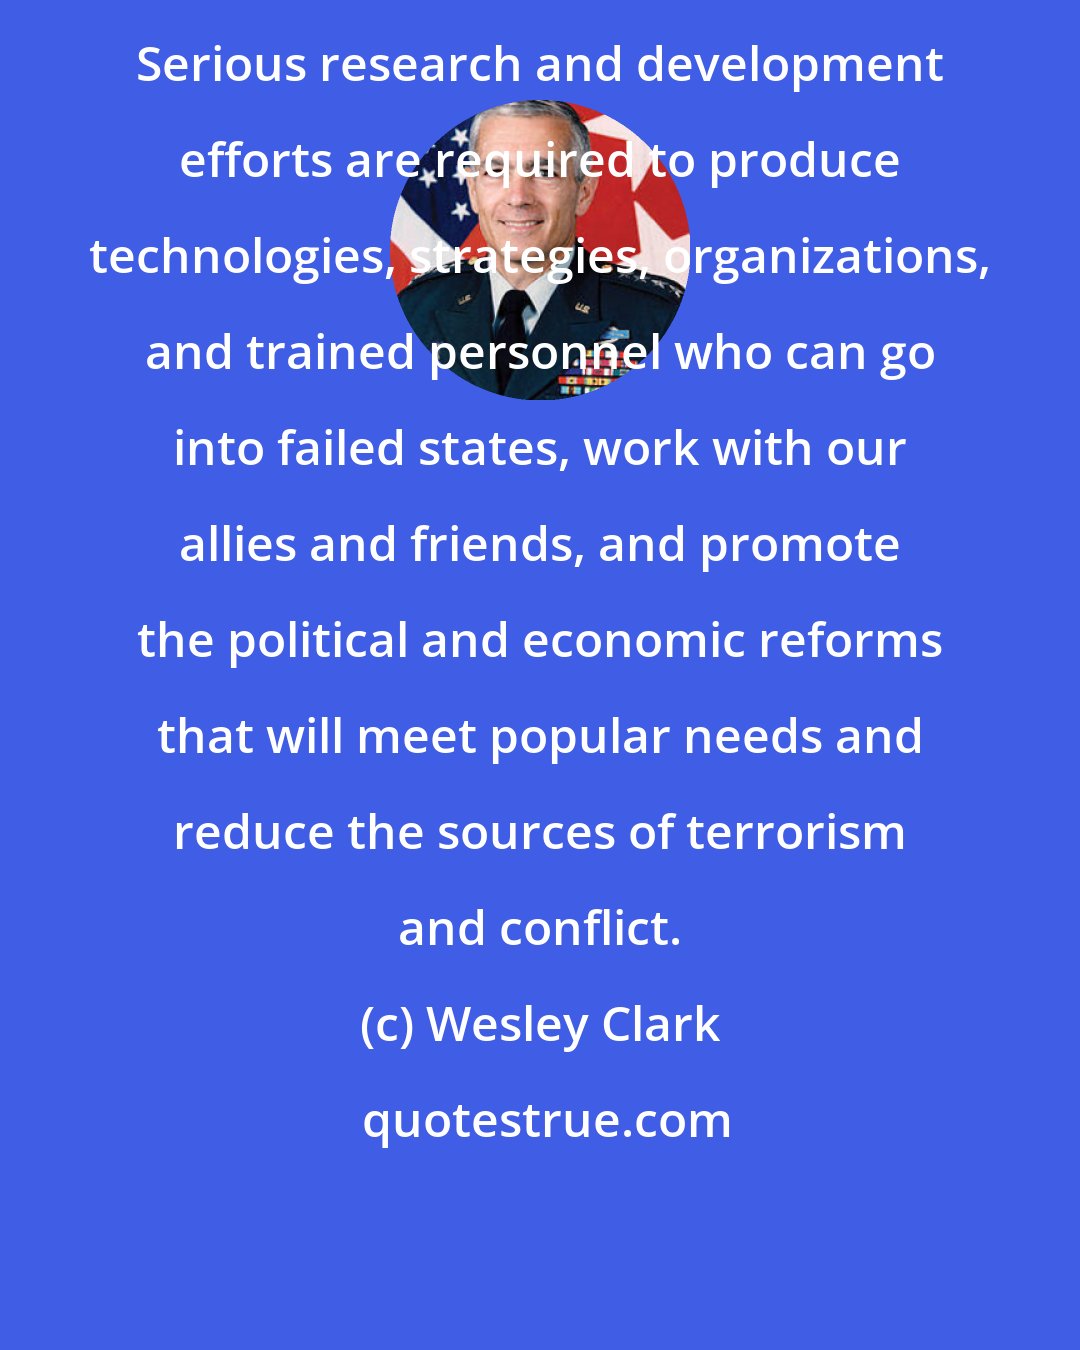 Wesley Clark: Serious research and development efforts are required to produce technologies, strategies, organizations, and trained personnel who can go into failed states, work with our allies and friends, and promote the political and economic reforms that will meet popular needs and reduce the sources of terrorism and conflict.